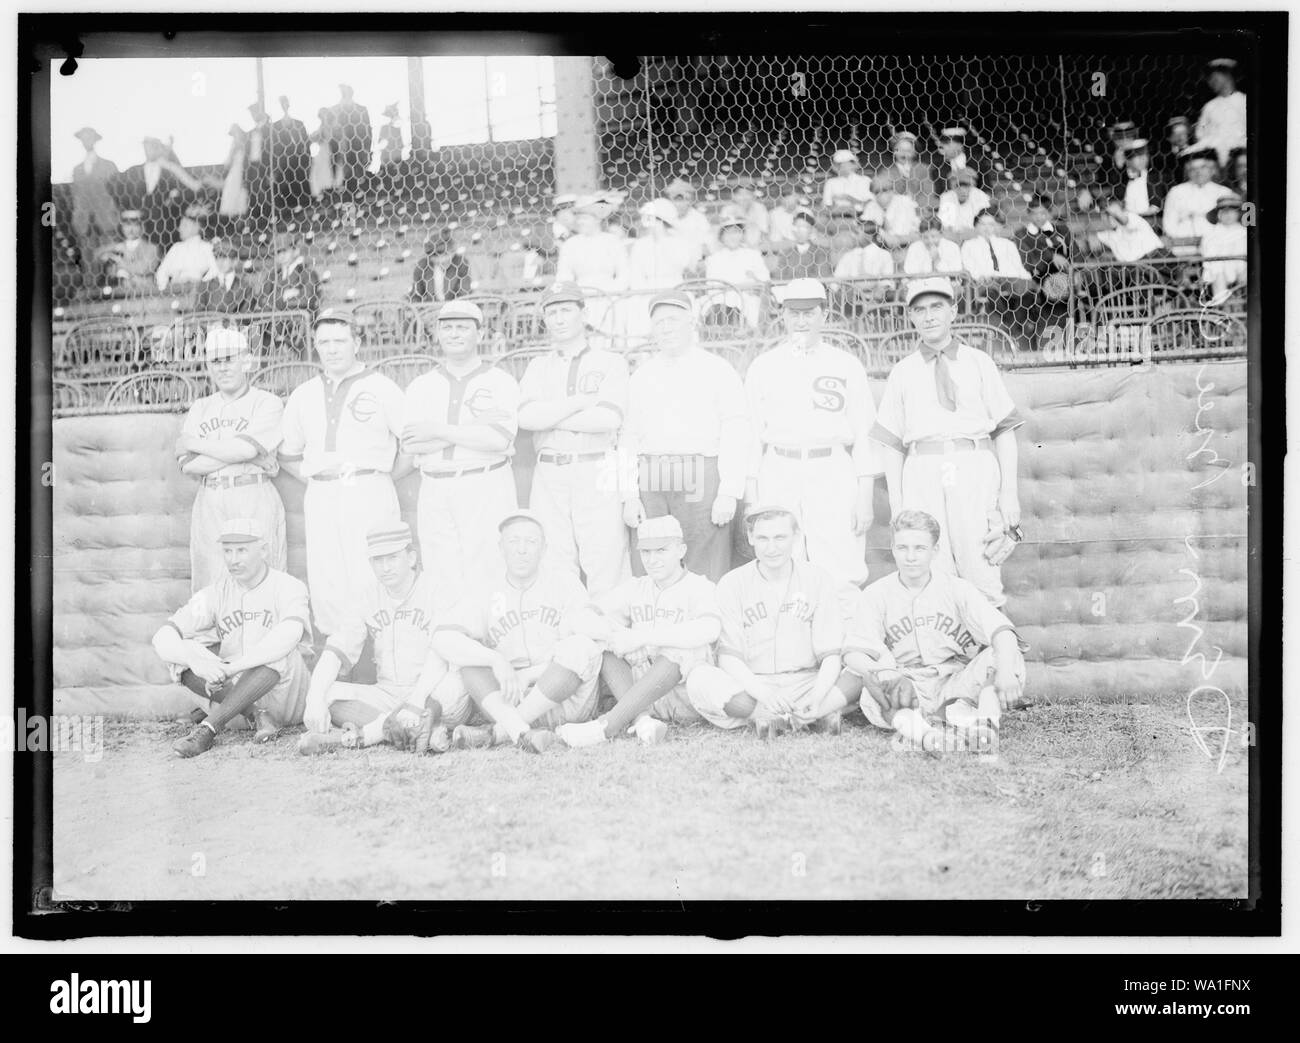 BASEBALL, CONGRESSIONAL. DEMOCRATS. STANDING: UNIDENTIFIED; KINKEAD OF NEW JERSEY; OLDFIELD OF ARKANSAS; WEBB OF NORTH CAROLINA; TOM REILLY OF CONNECTICUT; JIM McDERMOTT OF ILLINOIS; SCULLY OF NEW JERSEY; SEATED: UNIDENTIFIED; PAT HARRISON OF MISSISSIPPI; 2 UNIDENTIFIED; ELDER OF LOUISIANA; R.B. STEVENS Stock Photo